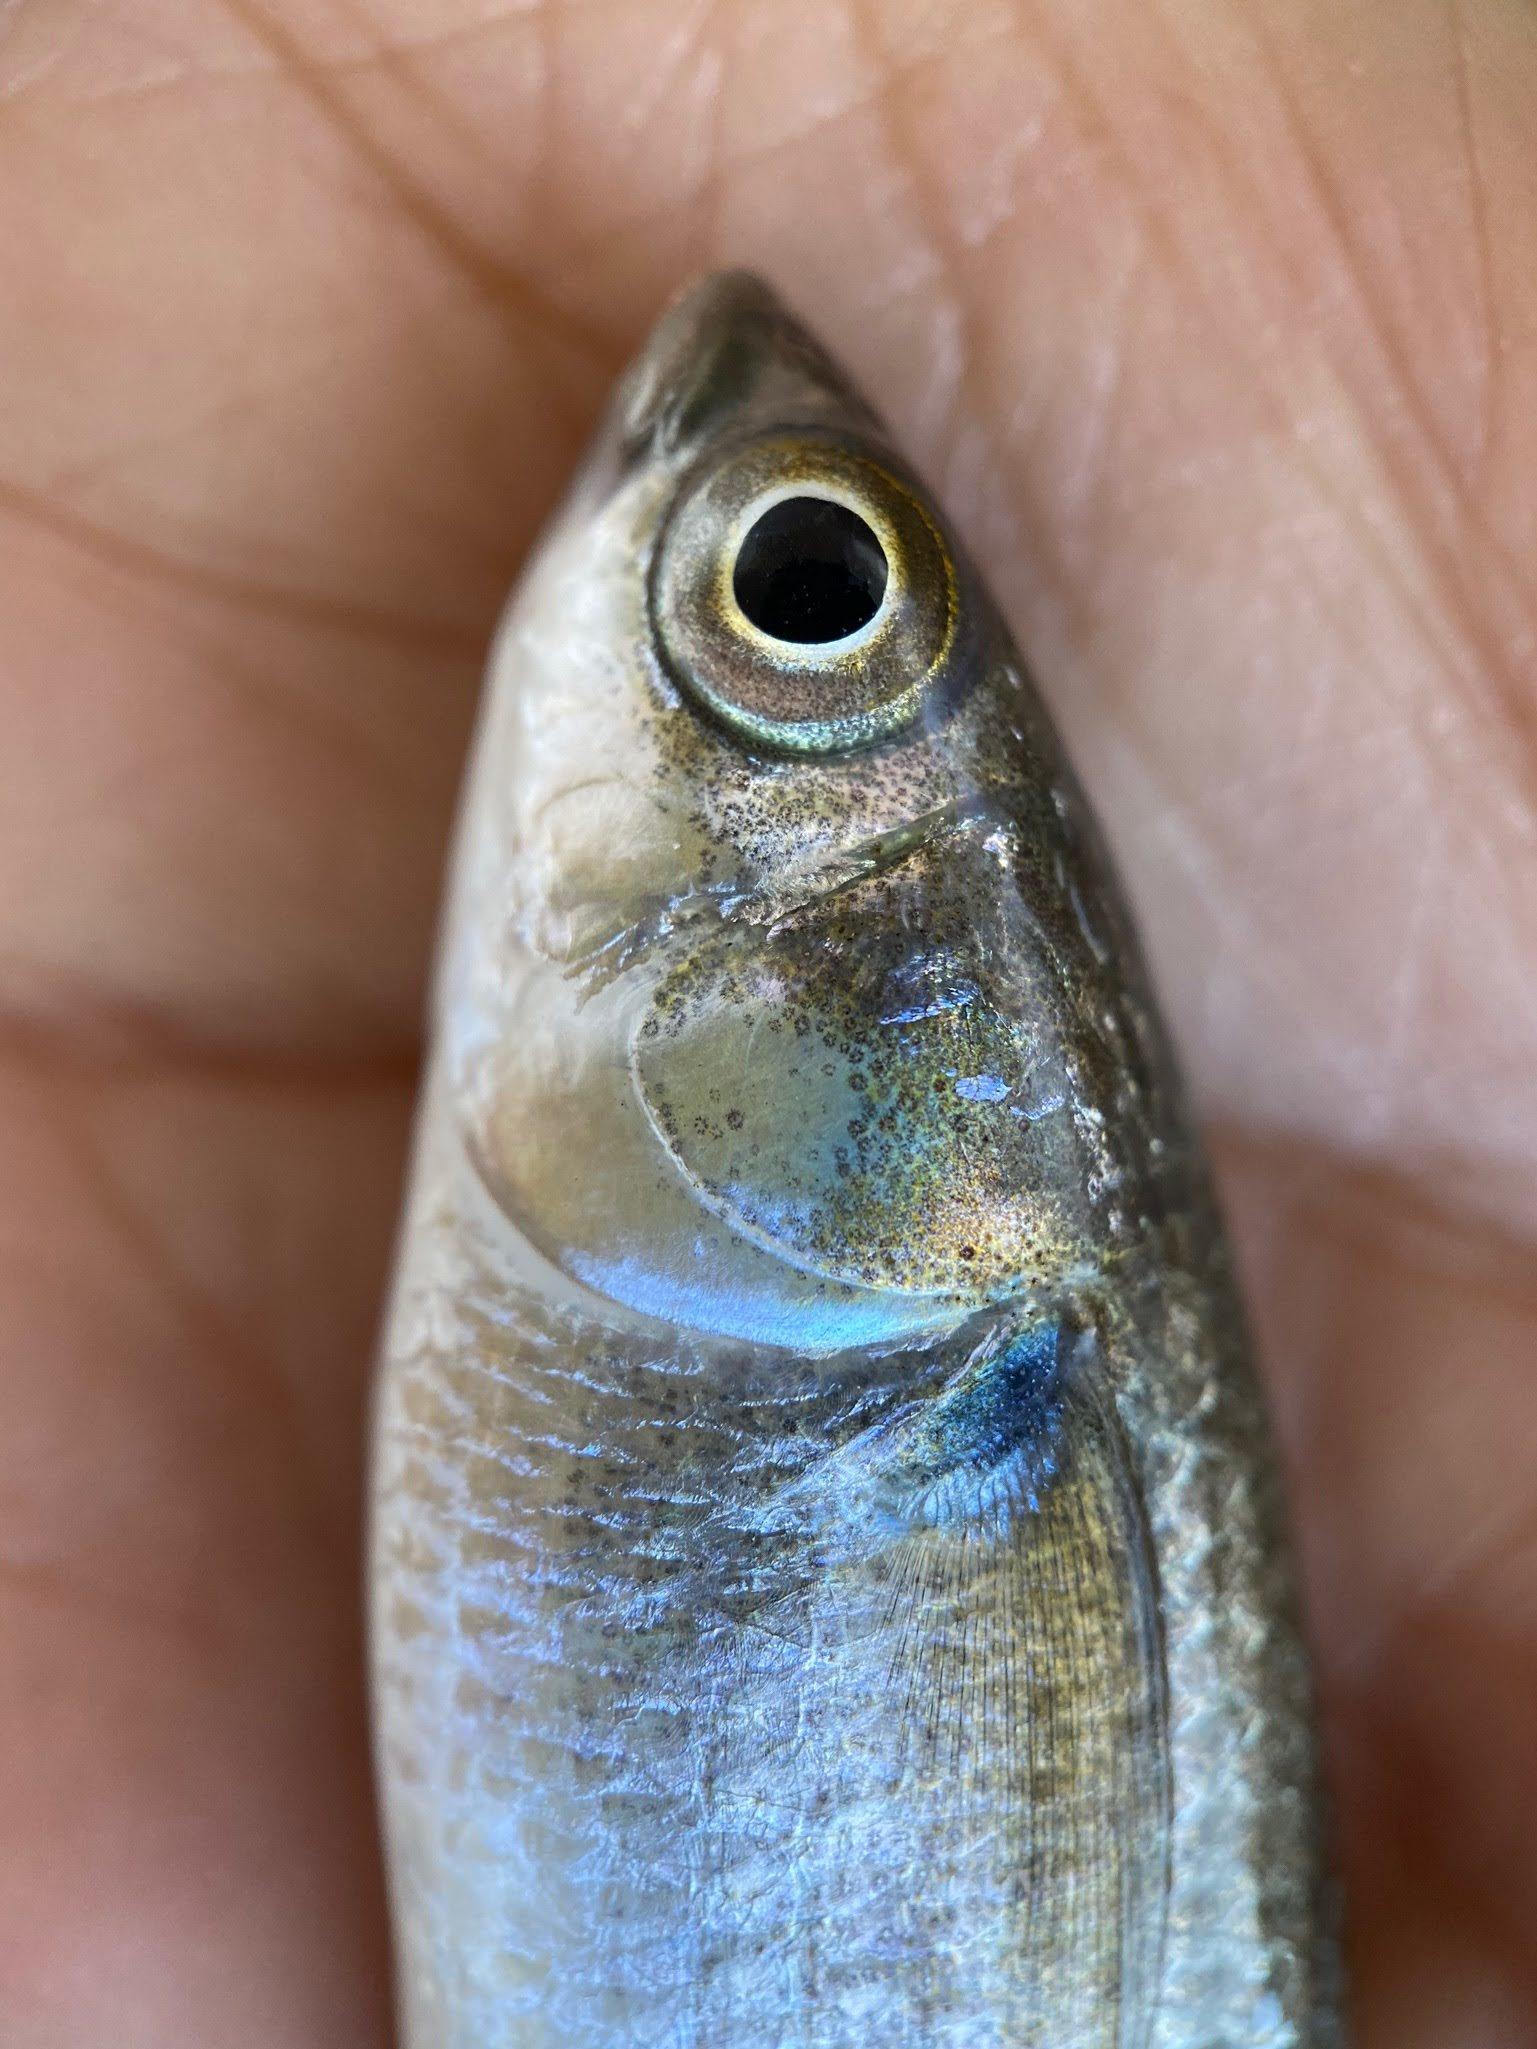 Each spring MLEF staff catch puaʻama—baby Striped mullet from the ʻauwai kai—saltwater channel. Staff track the growth monthly to ensure a healthy population for future. December 2020